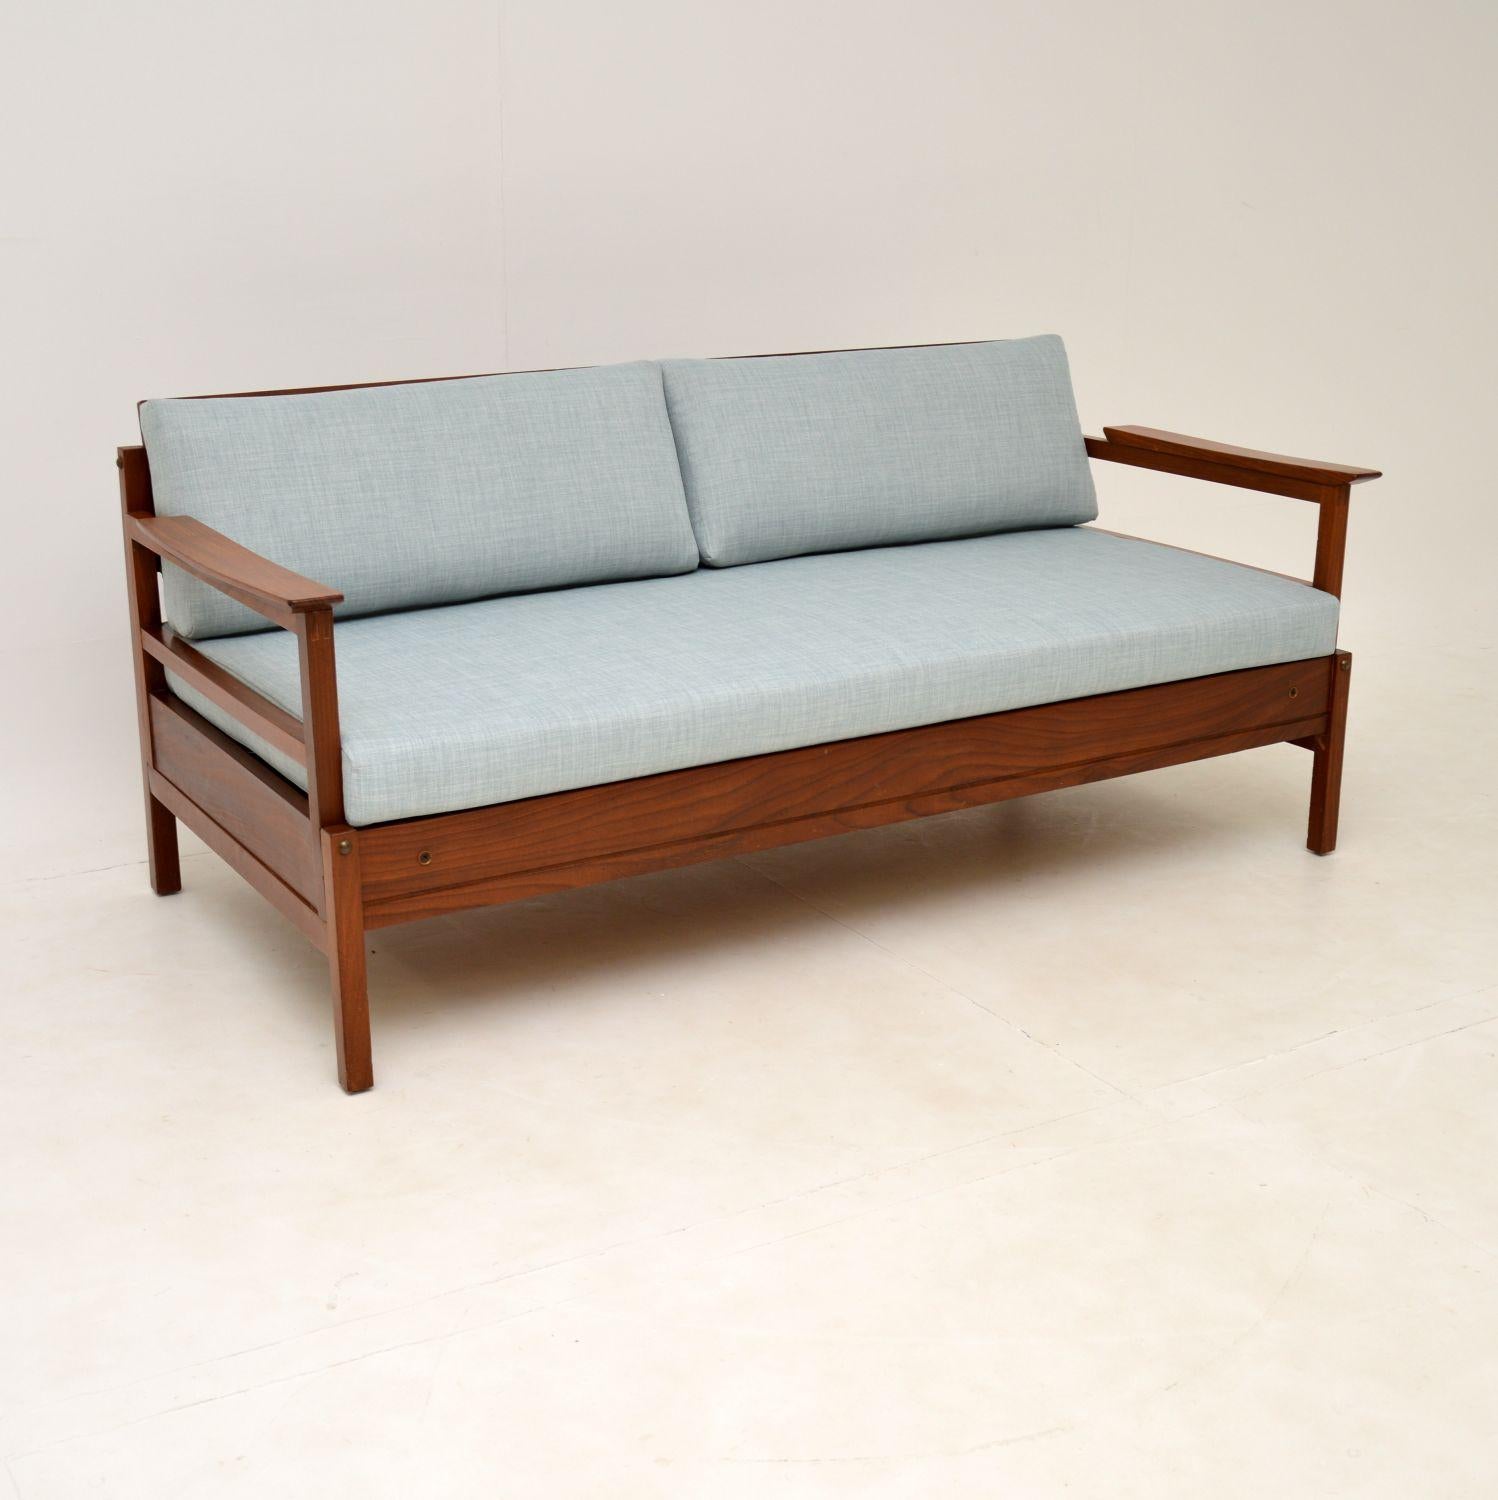 A stylish and very rare vintage ‘Gambit’ sofa bed by Guy Rogers. This was made in England during the 1960’s.

The frame is solid afromosia wood, which has gorgeous grain patterns and a beautiful, rich colour. The cushions have been newly made and